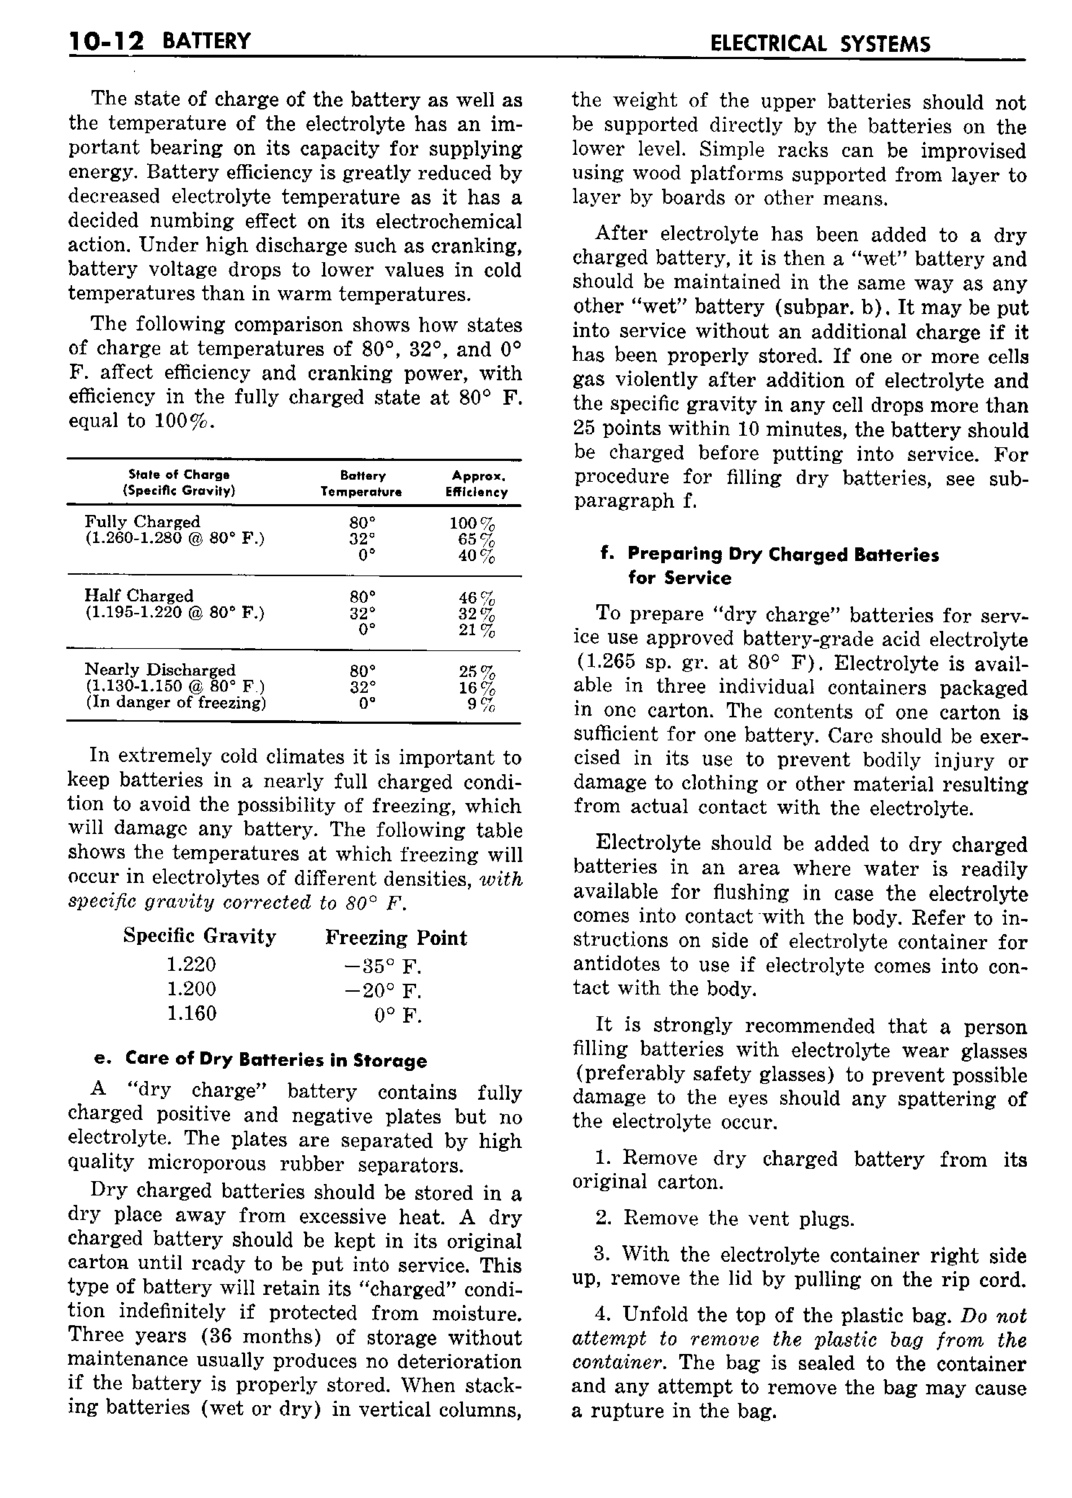 n_11 1960 Buick Shop Manual - Electrical Systems-012-012.jpg